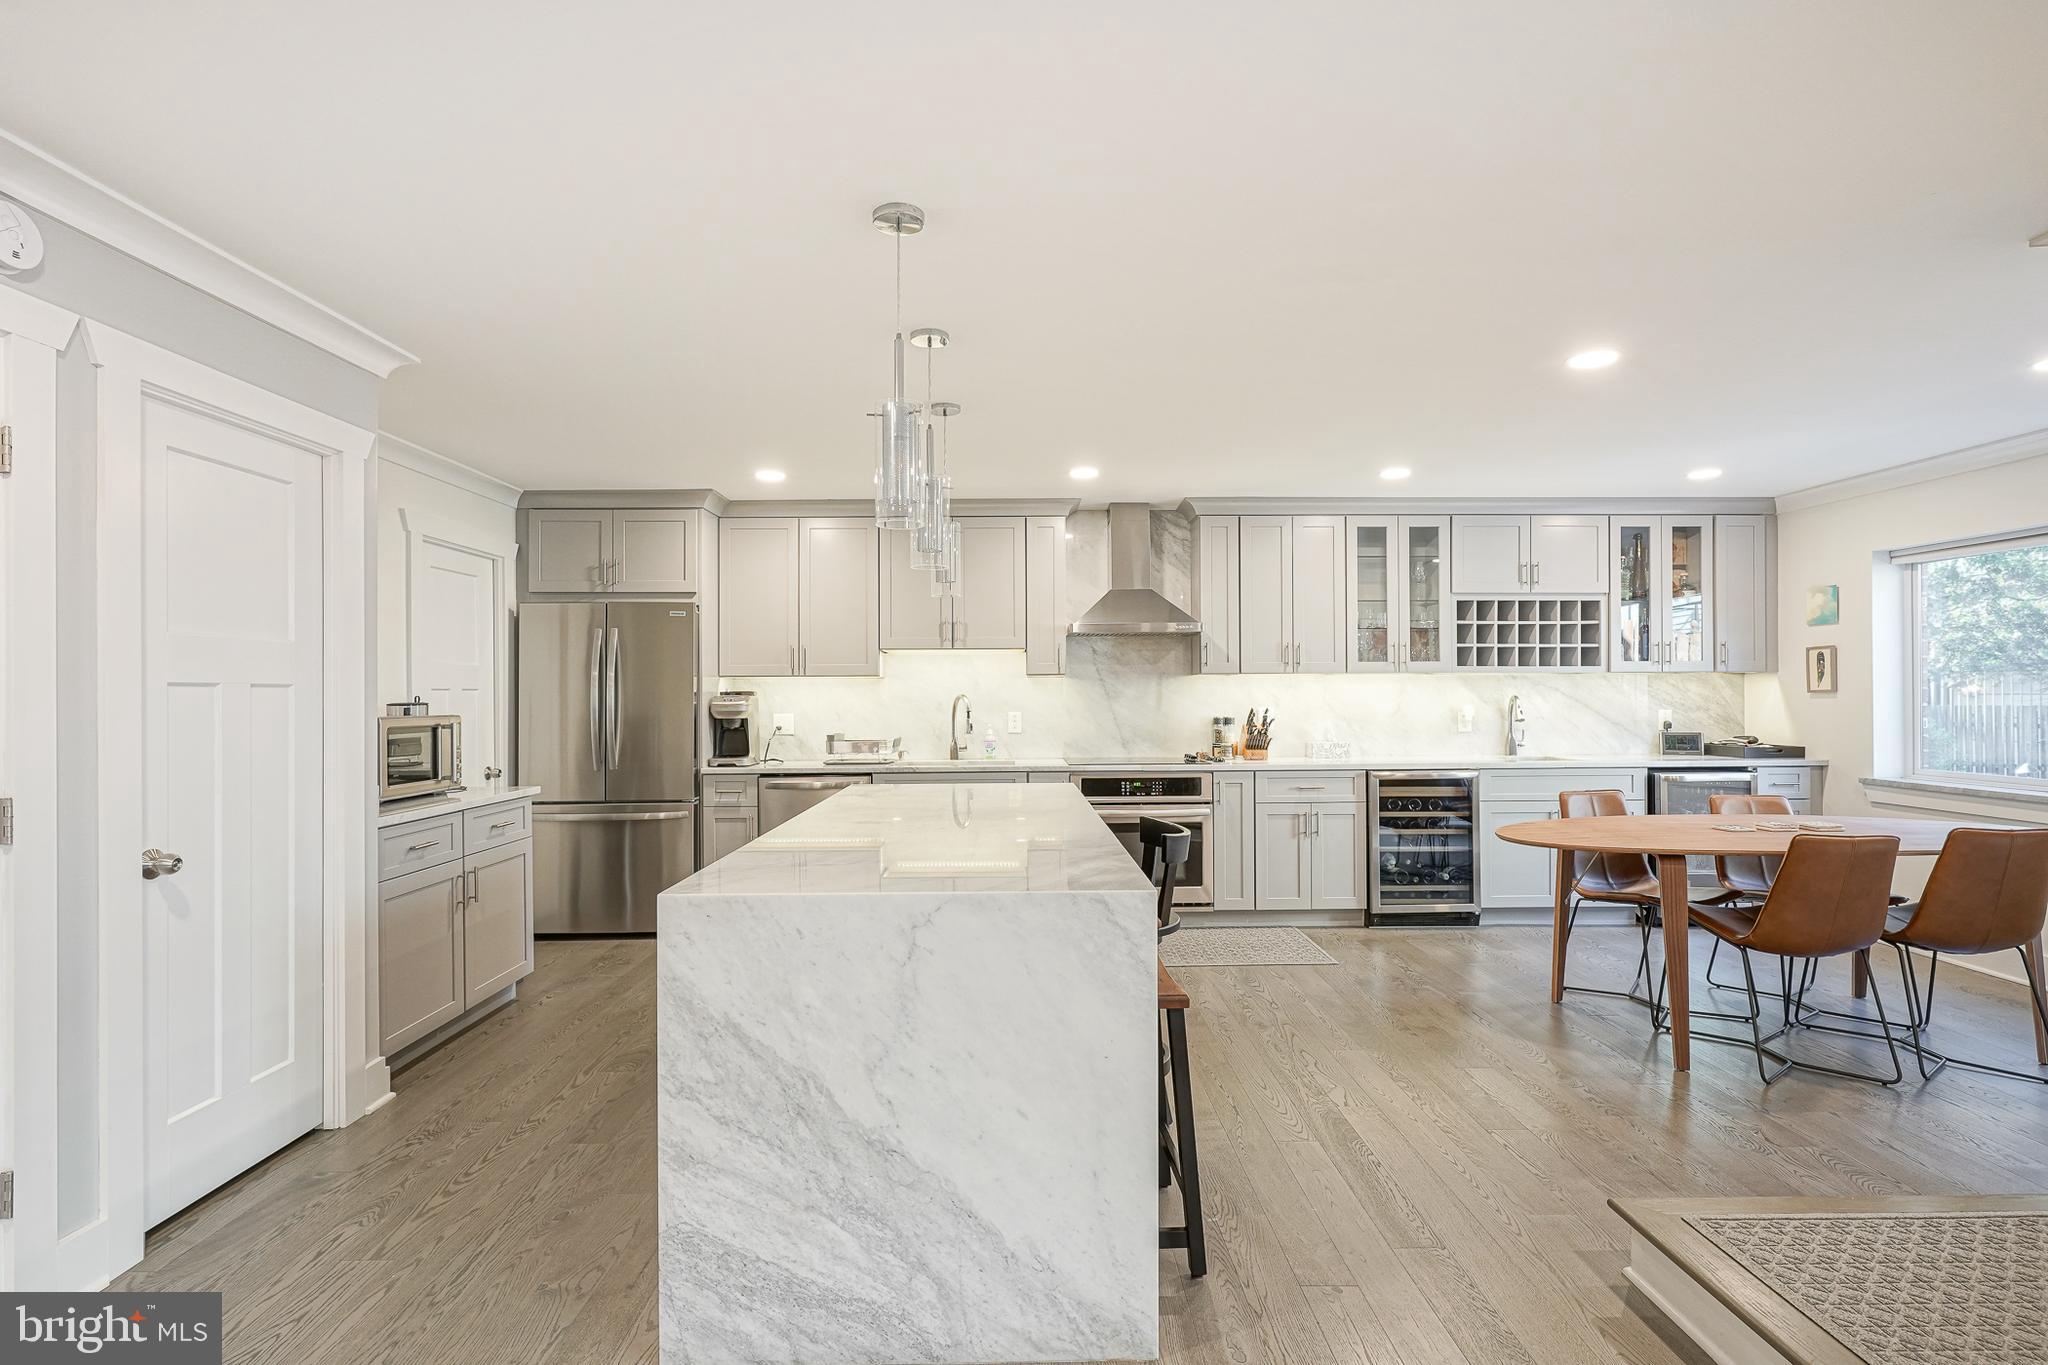 a kitchen with stainless steel appliances kitchen island granite countertop a refrigerator a stove a sink a dining table and chairs with wooden floor